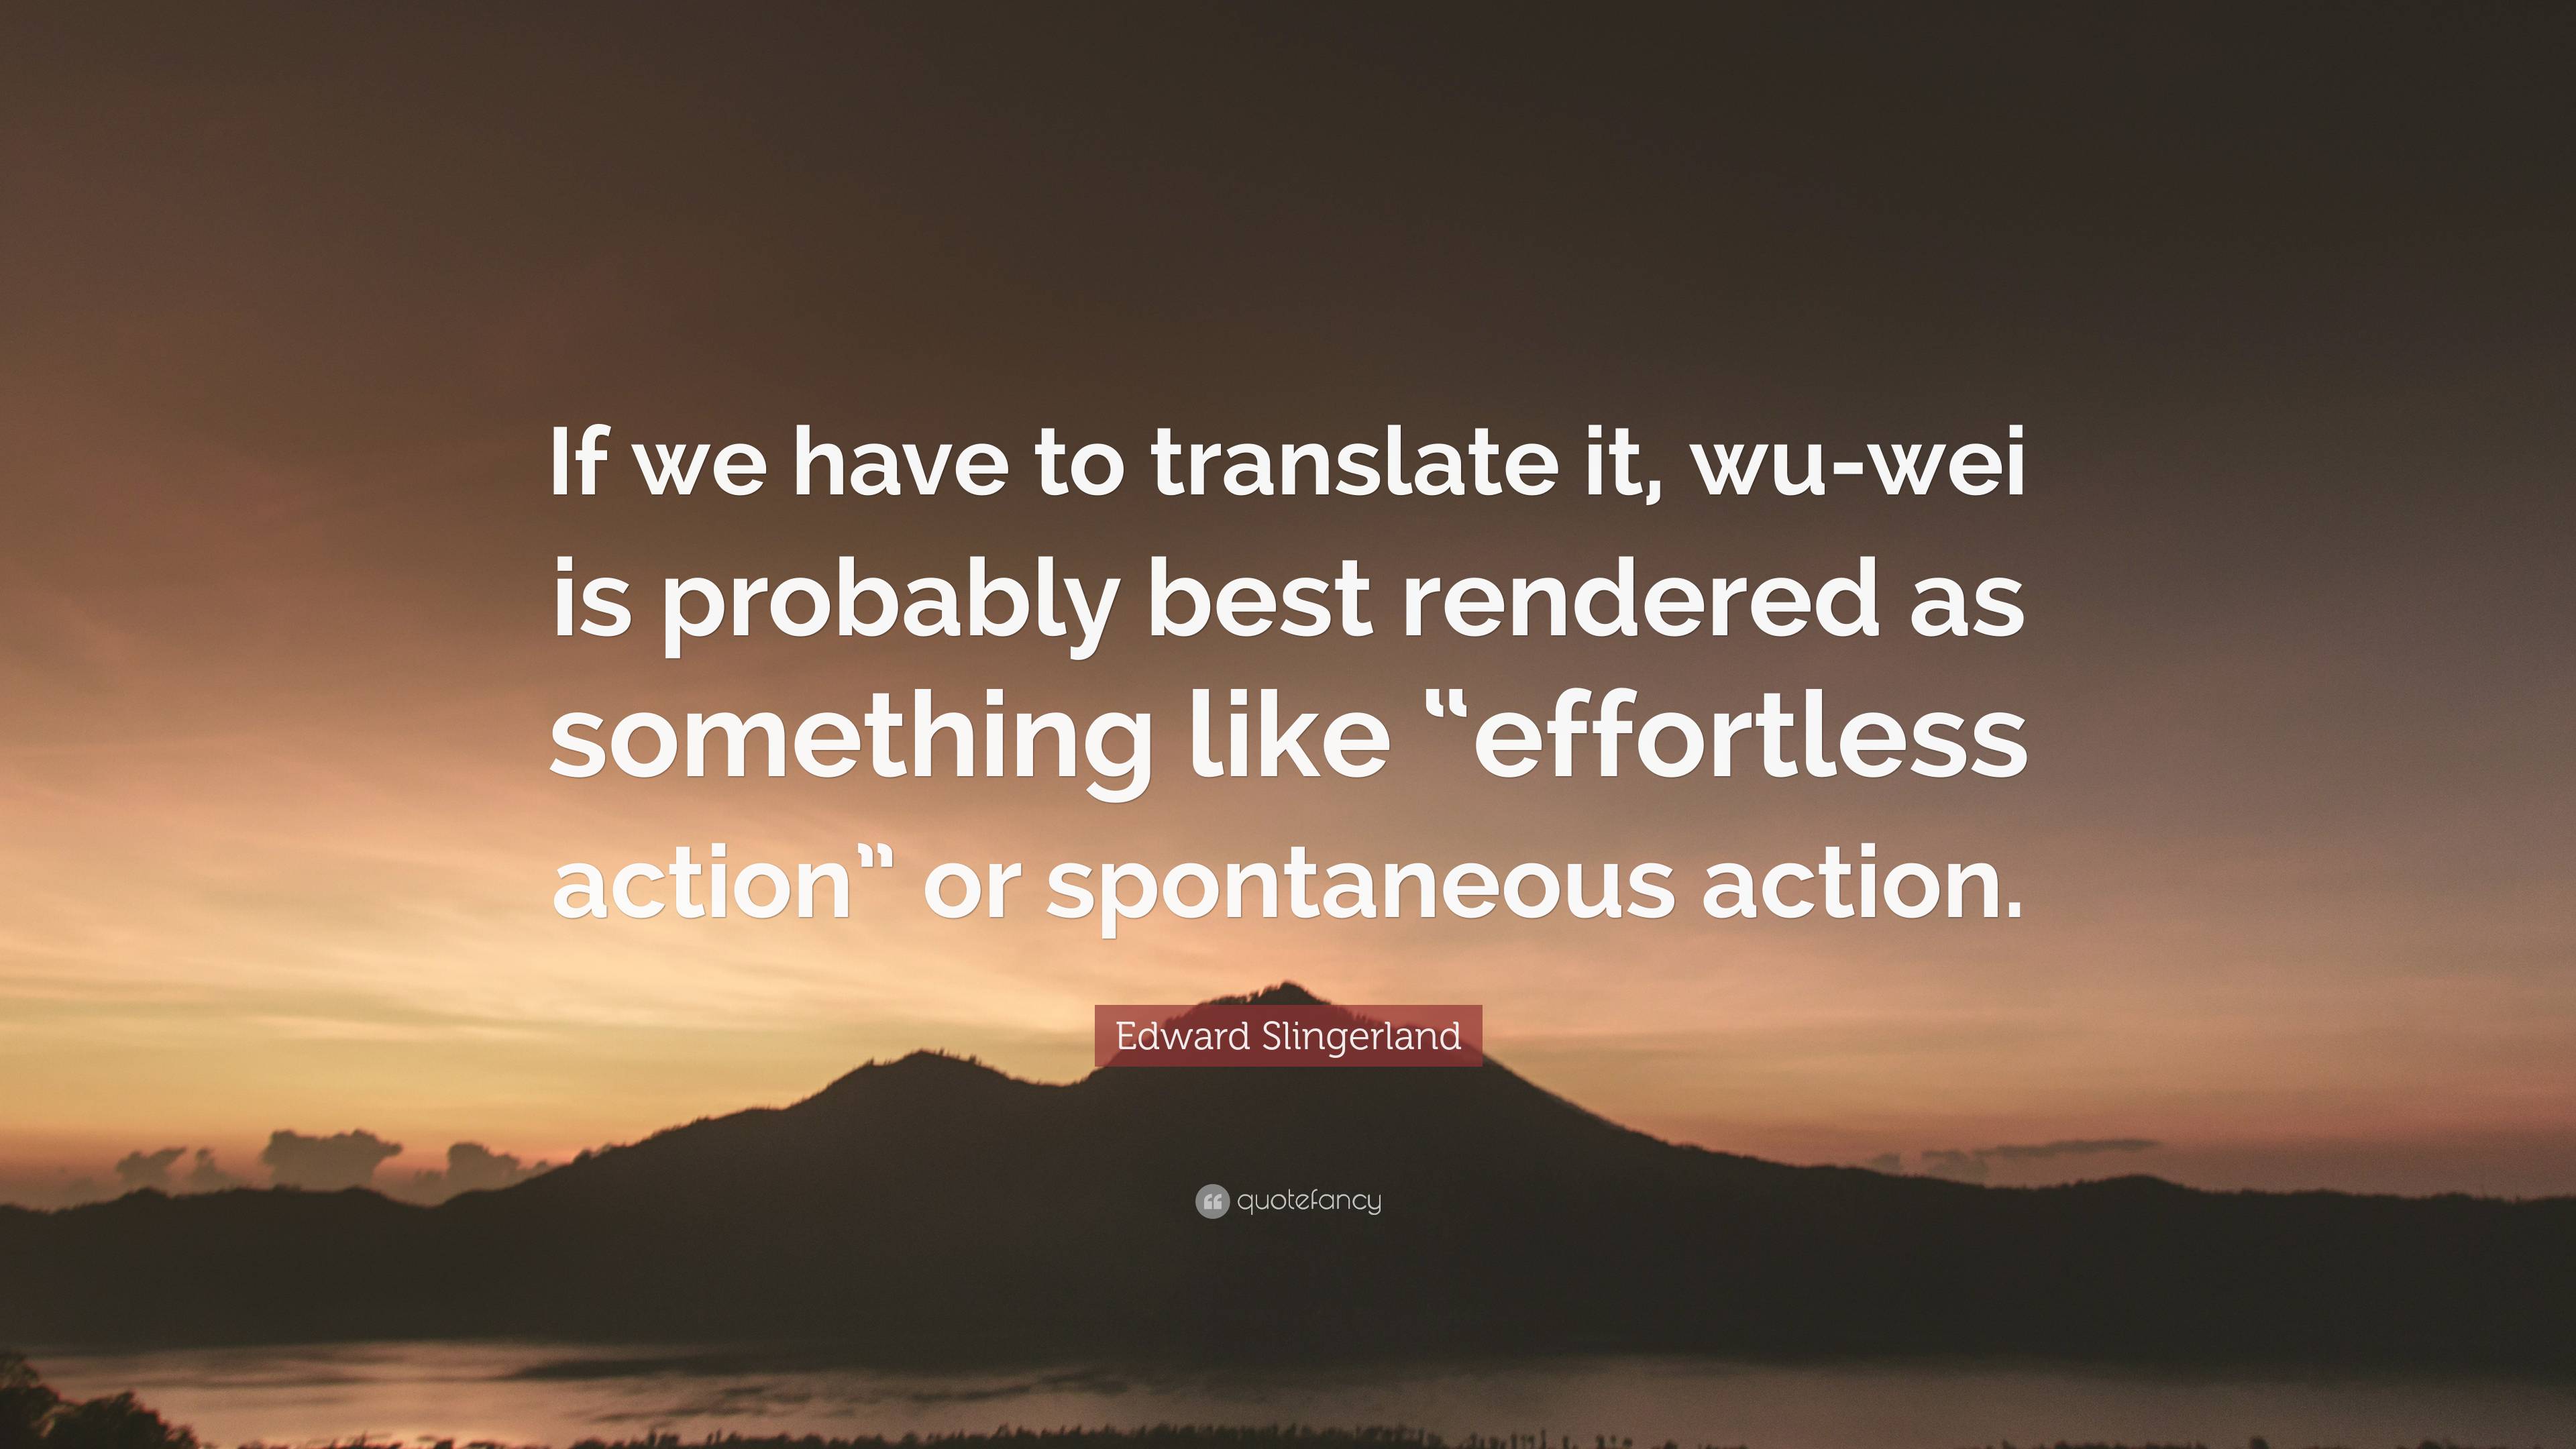 Edward Slingerland Quote: “If we have to translate it, wu-wei is